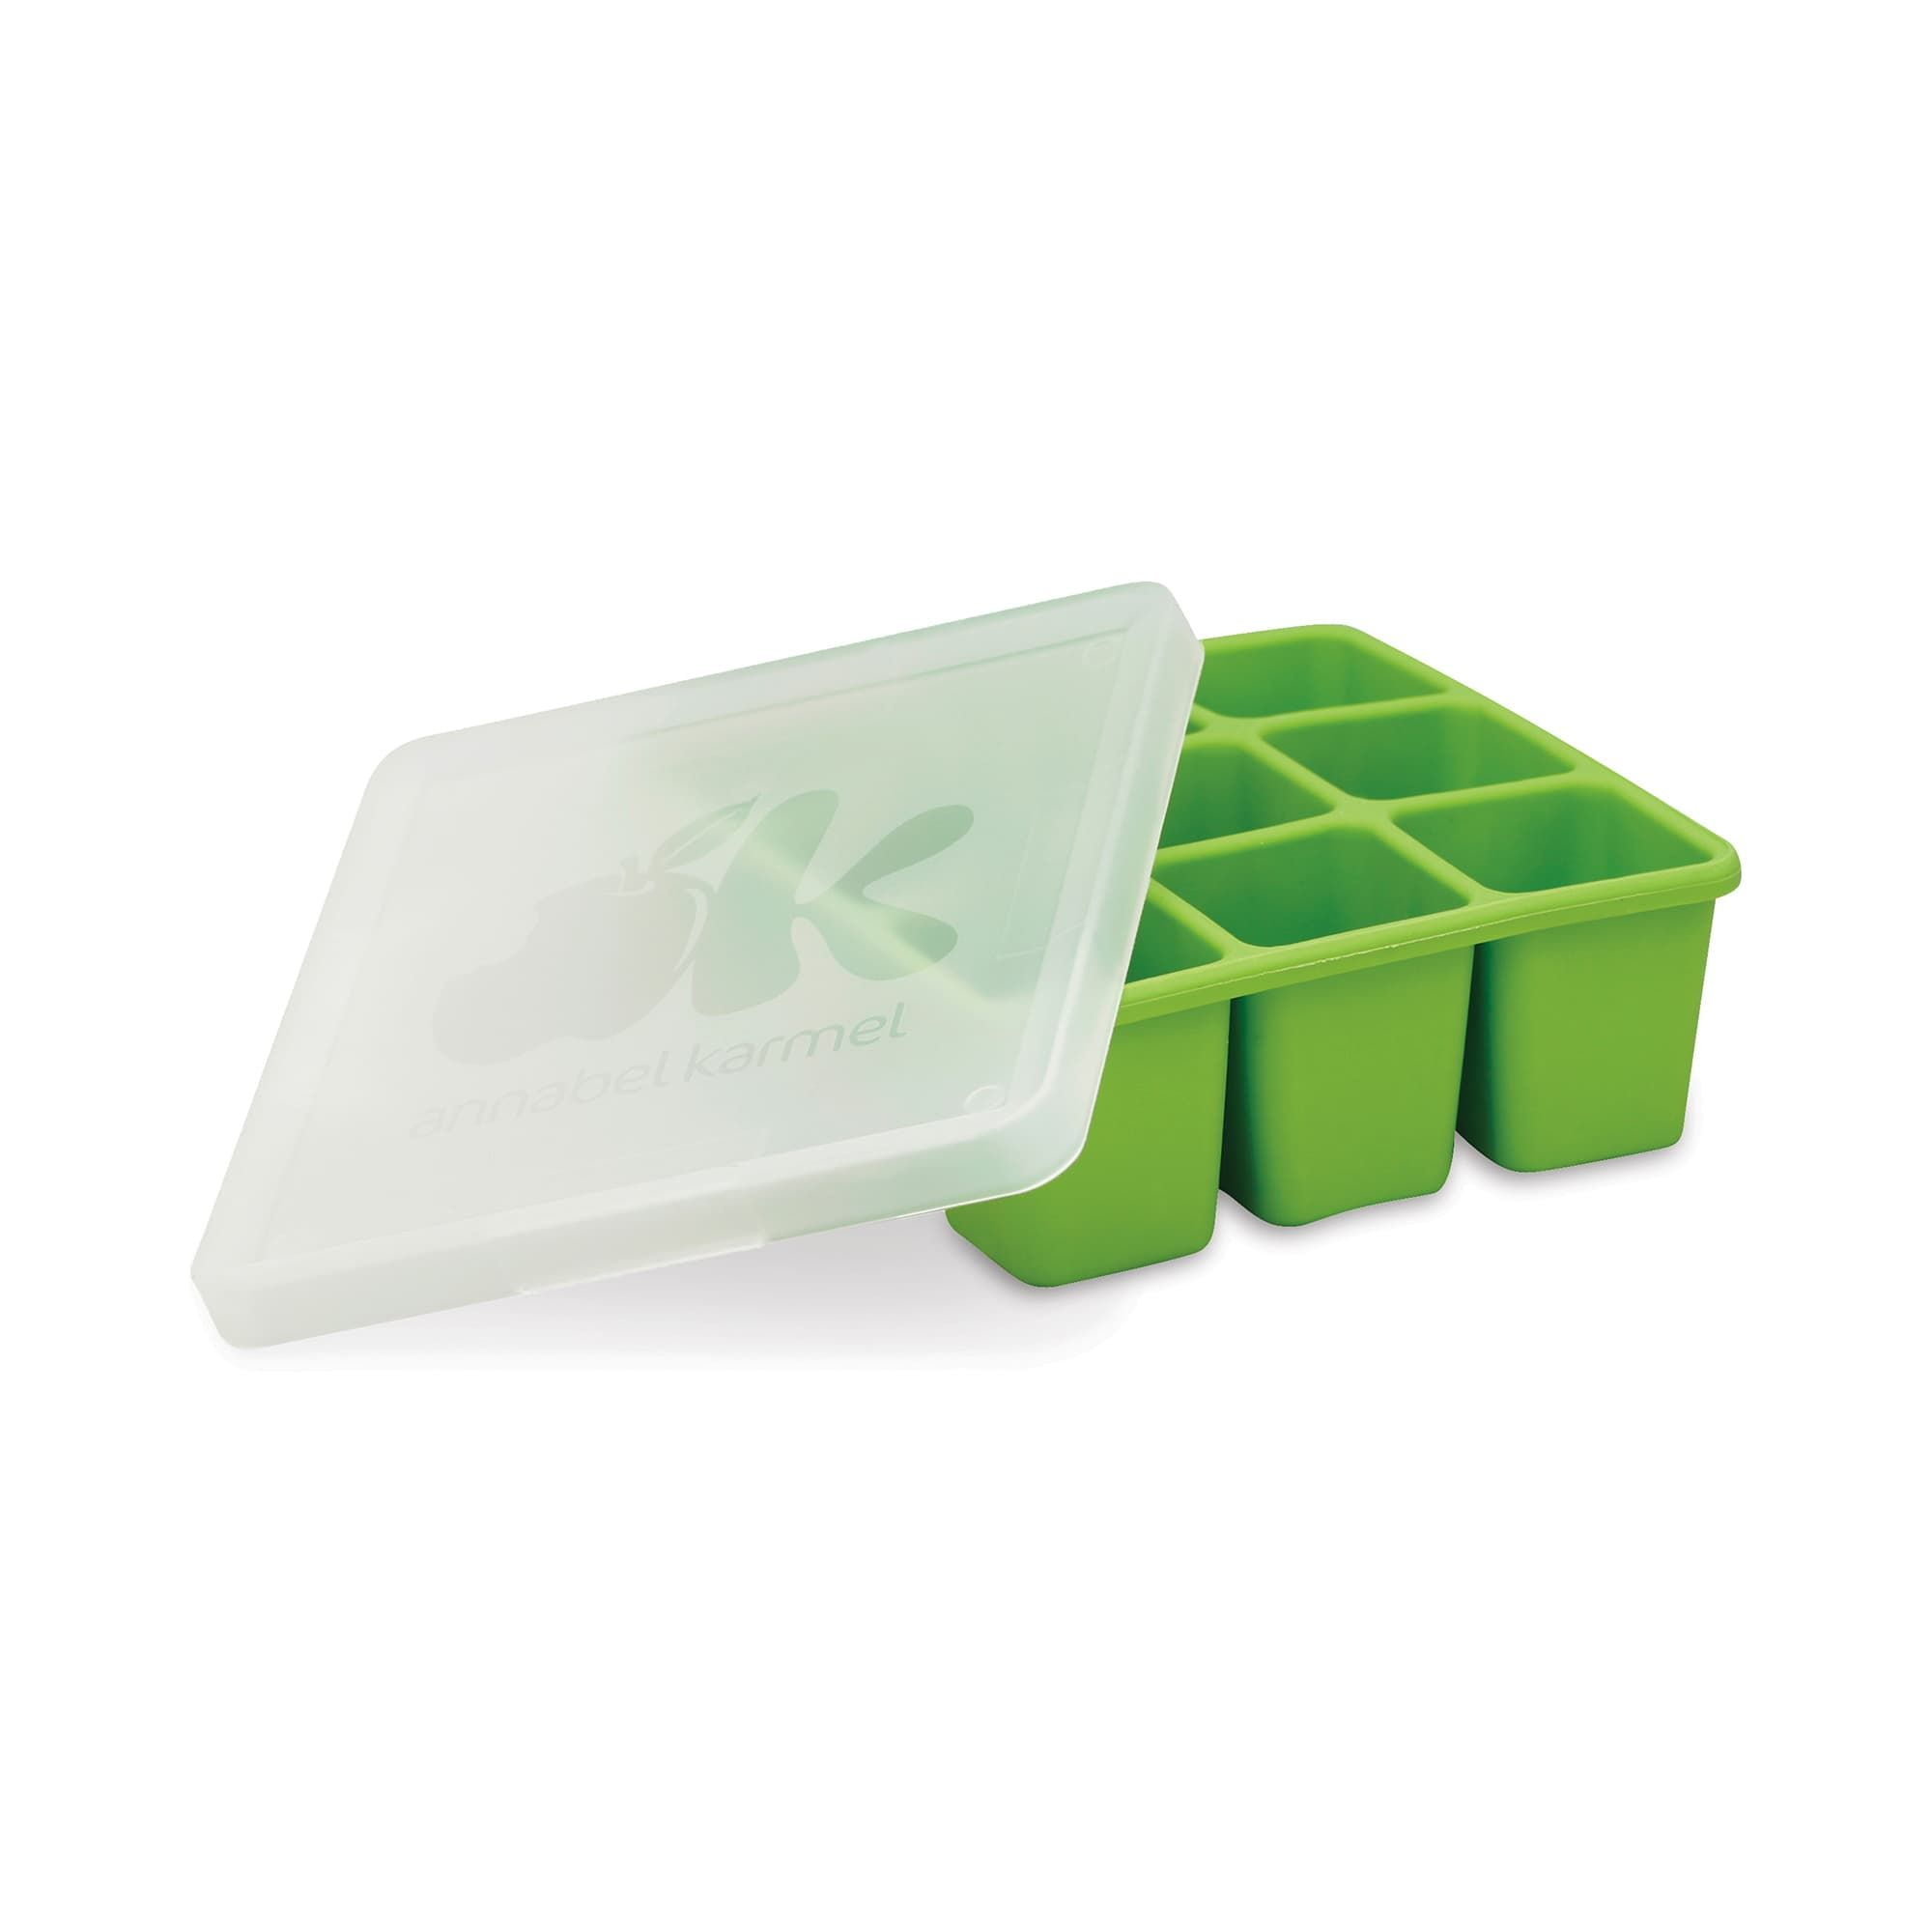 Annabel Karmel by NUK Frozen Baby Food Storage Container 1 2 Pack